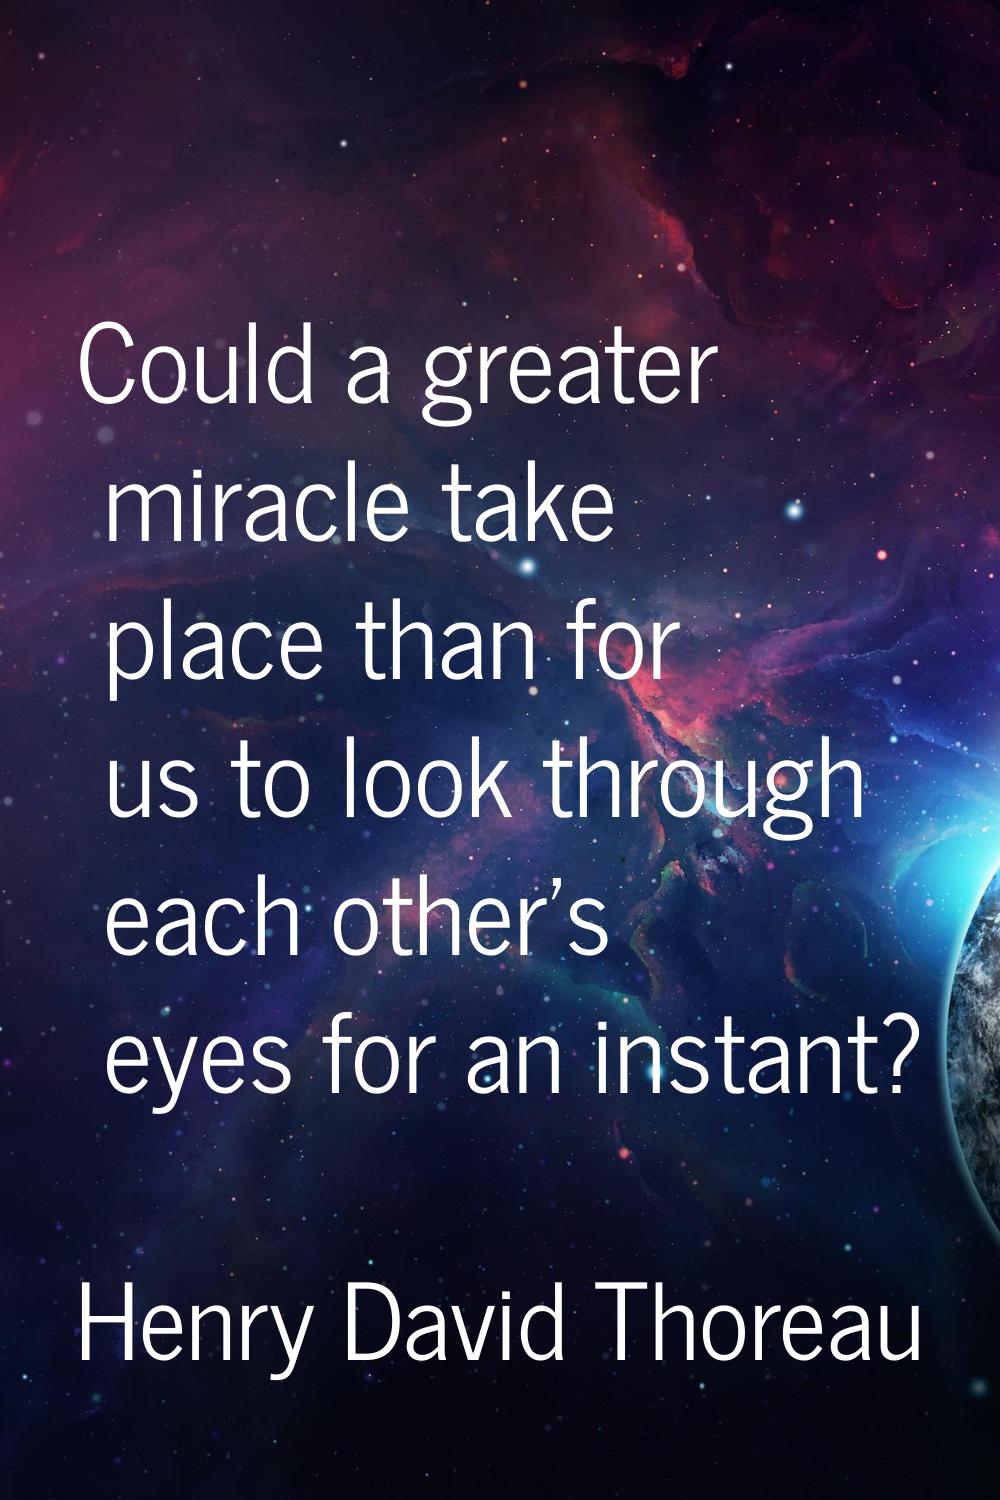 Could a greater miracle take place than for us to look through each other's eyes for an instant?